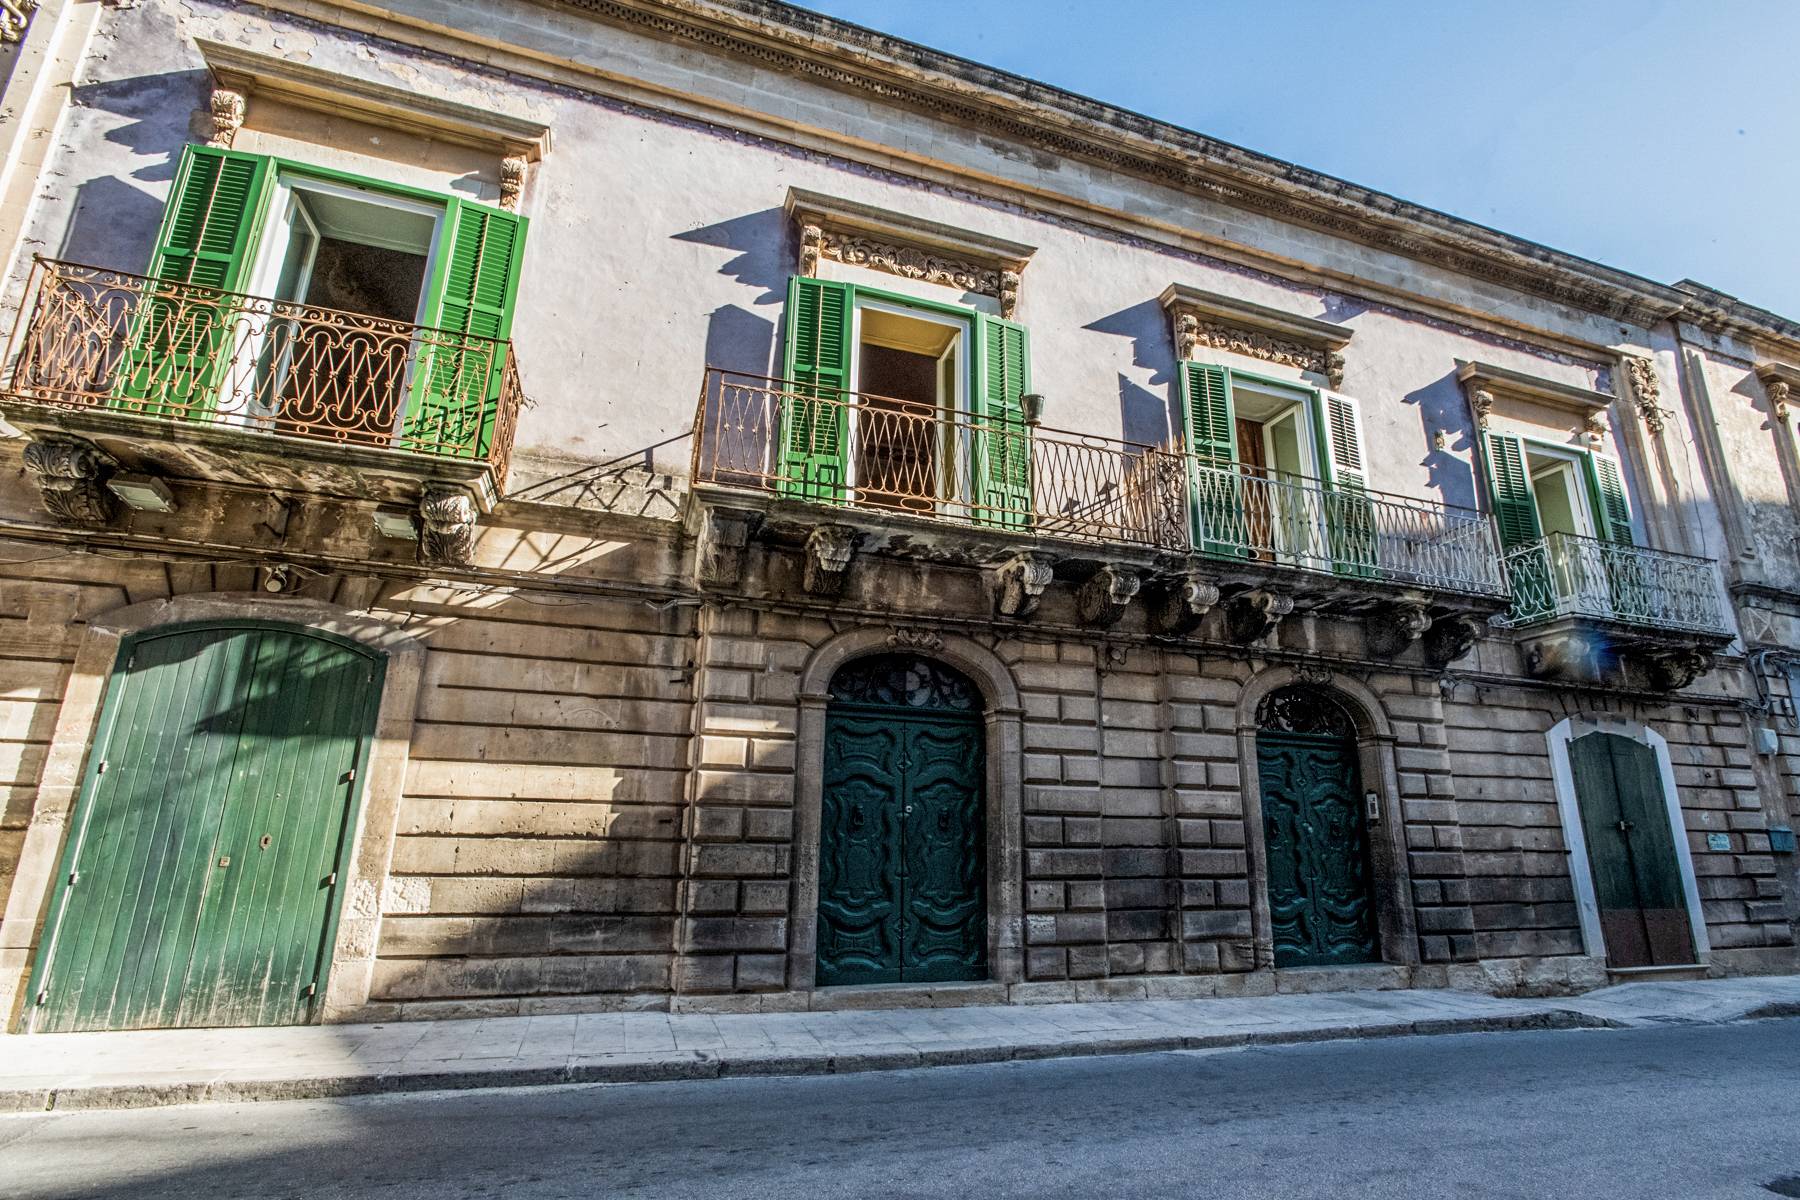 Independent stately palace in the historic center of Modica